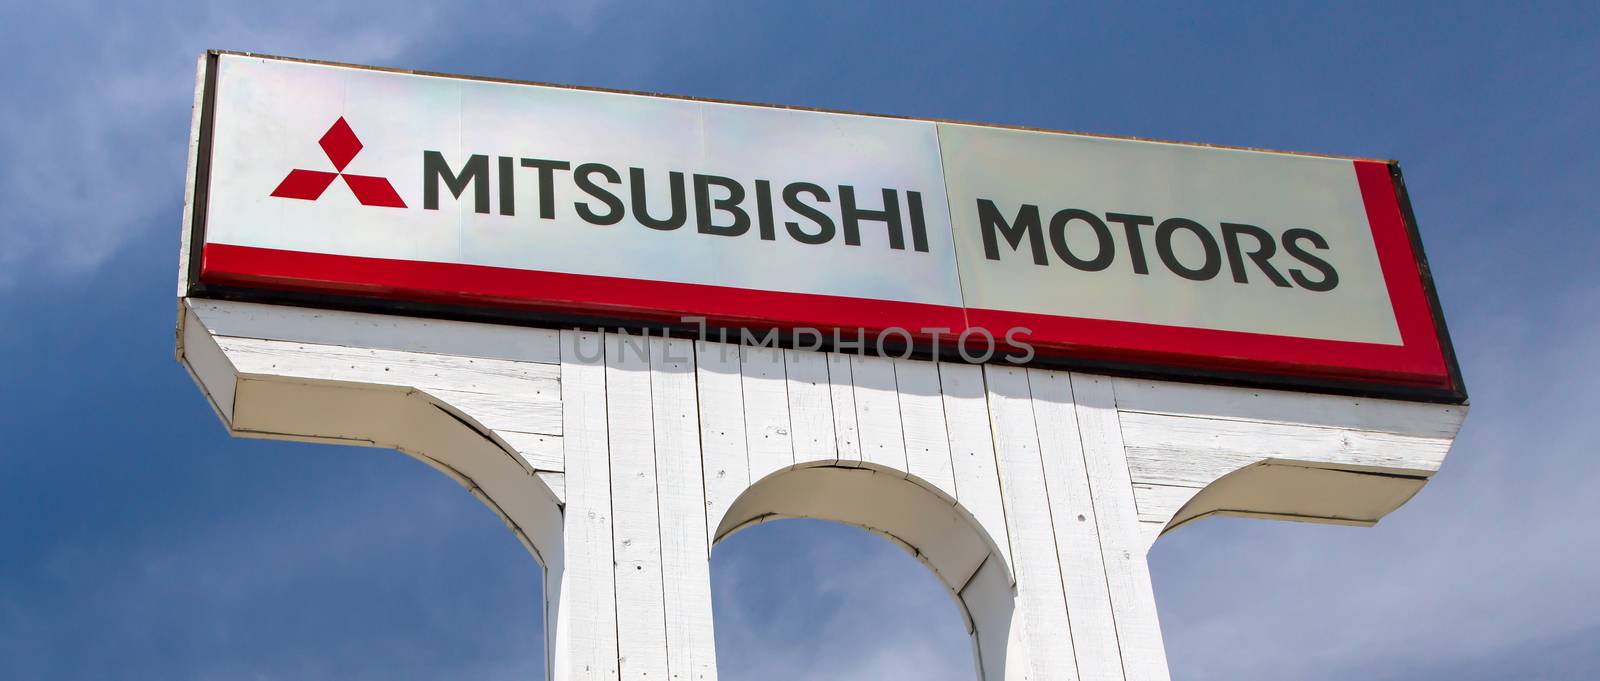 Mitsubishi Motors  Autombile Dealership Sign by wolterk